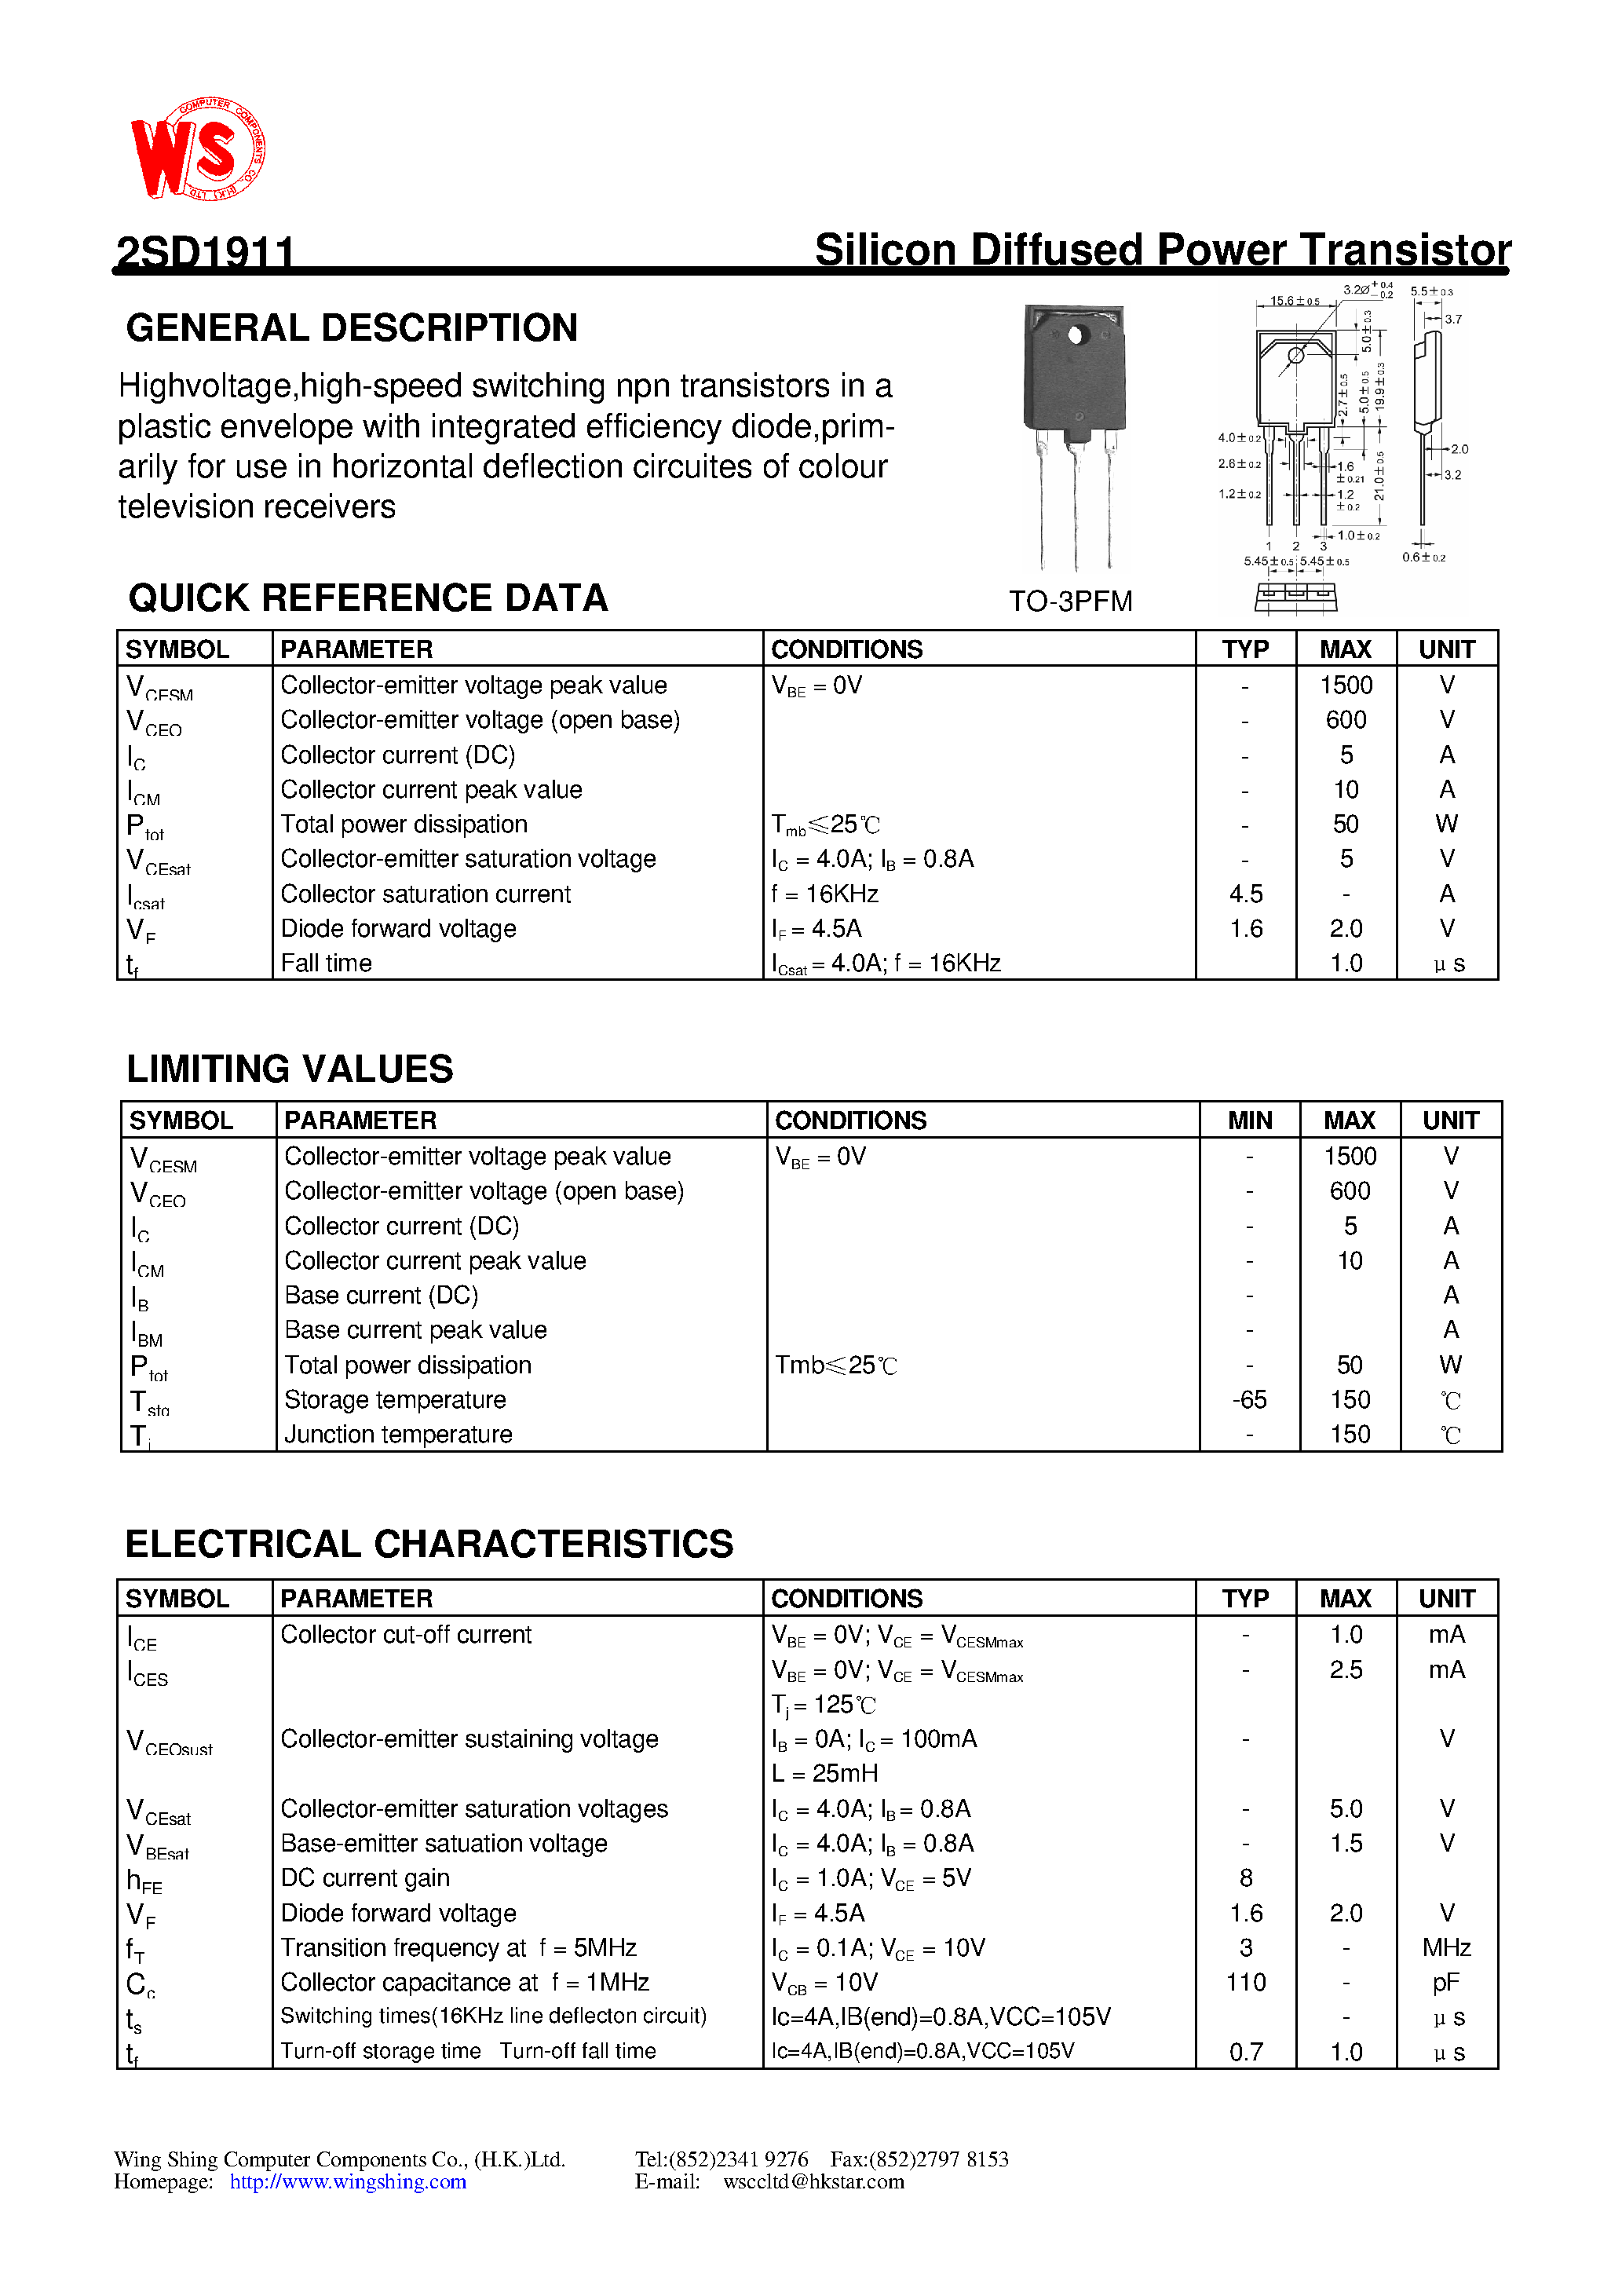 Datasheet D1911 - Search -----> 2SD1911 page 1